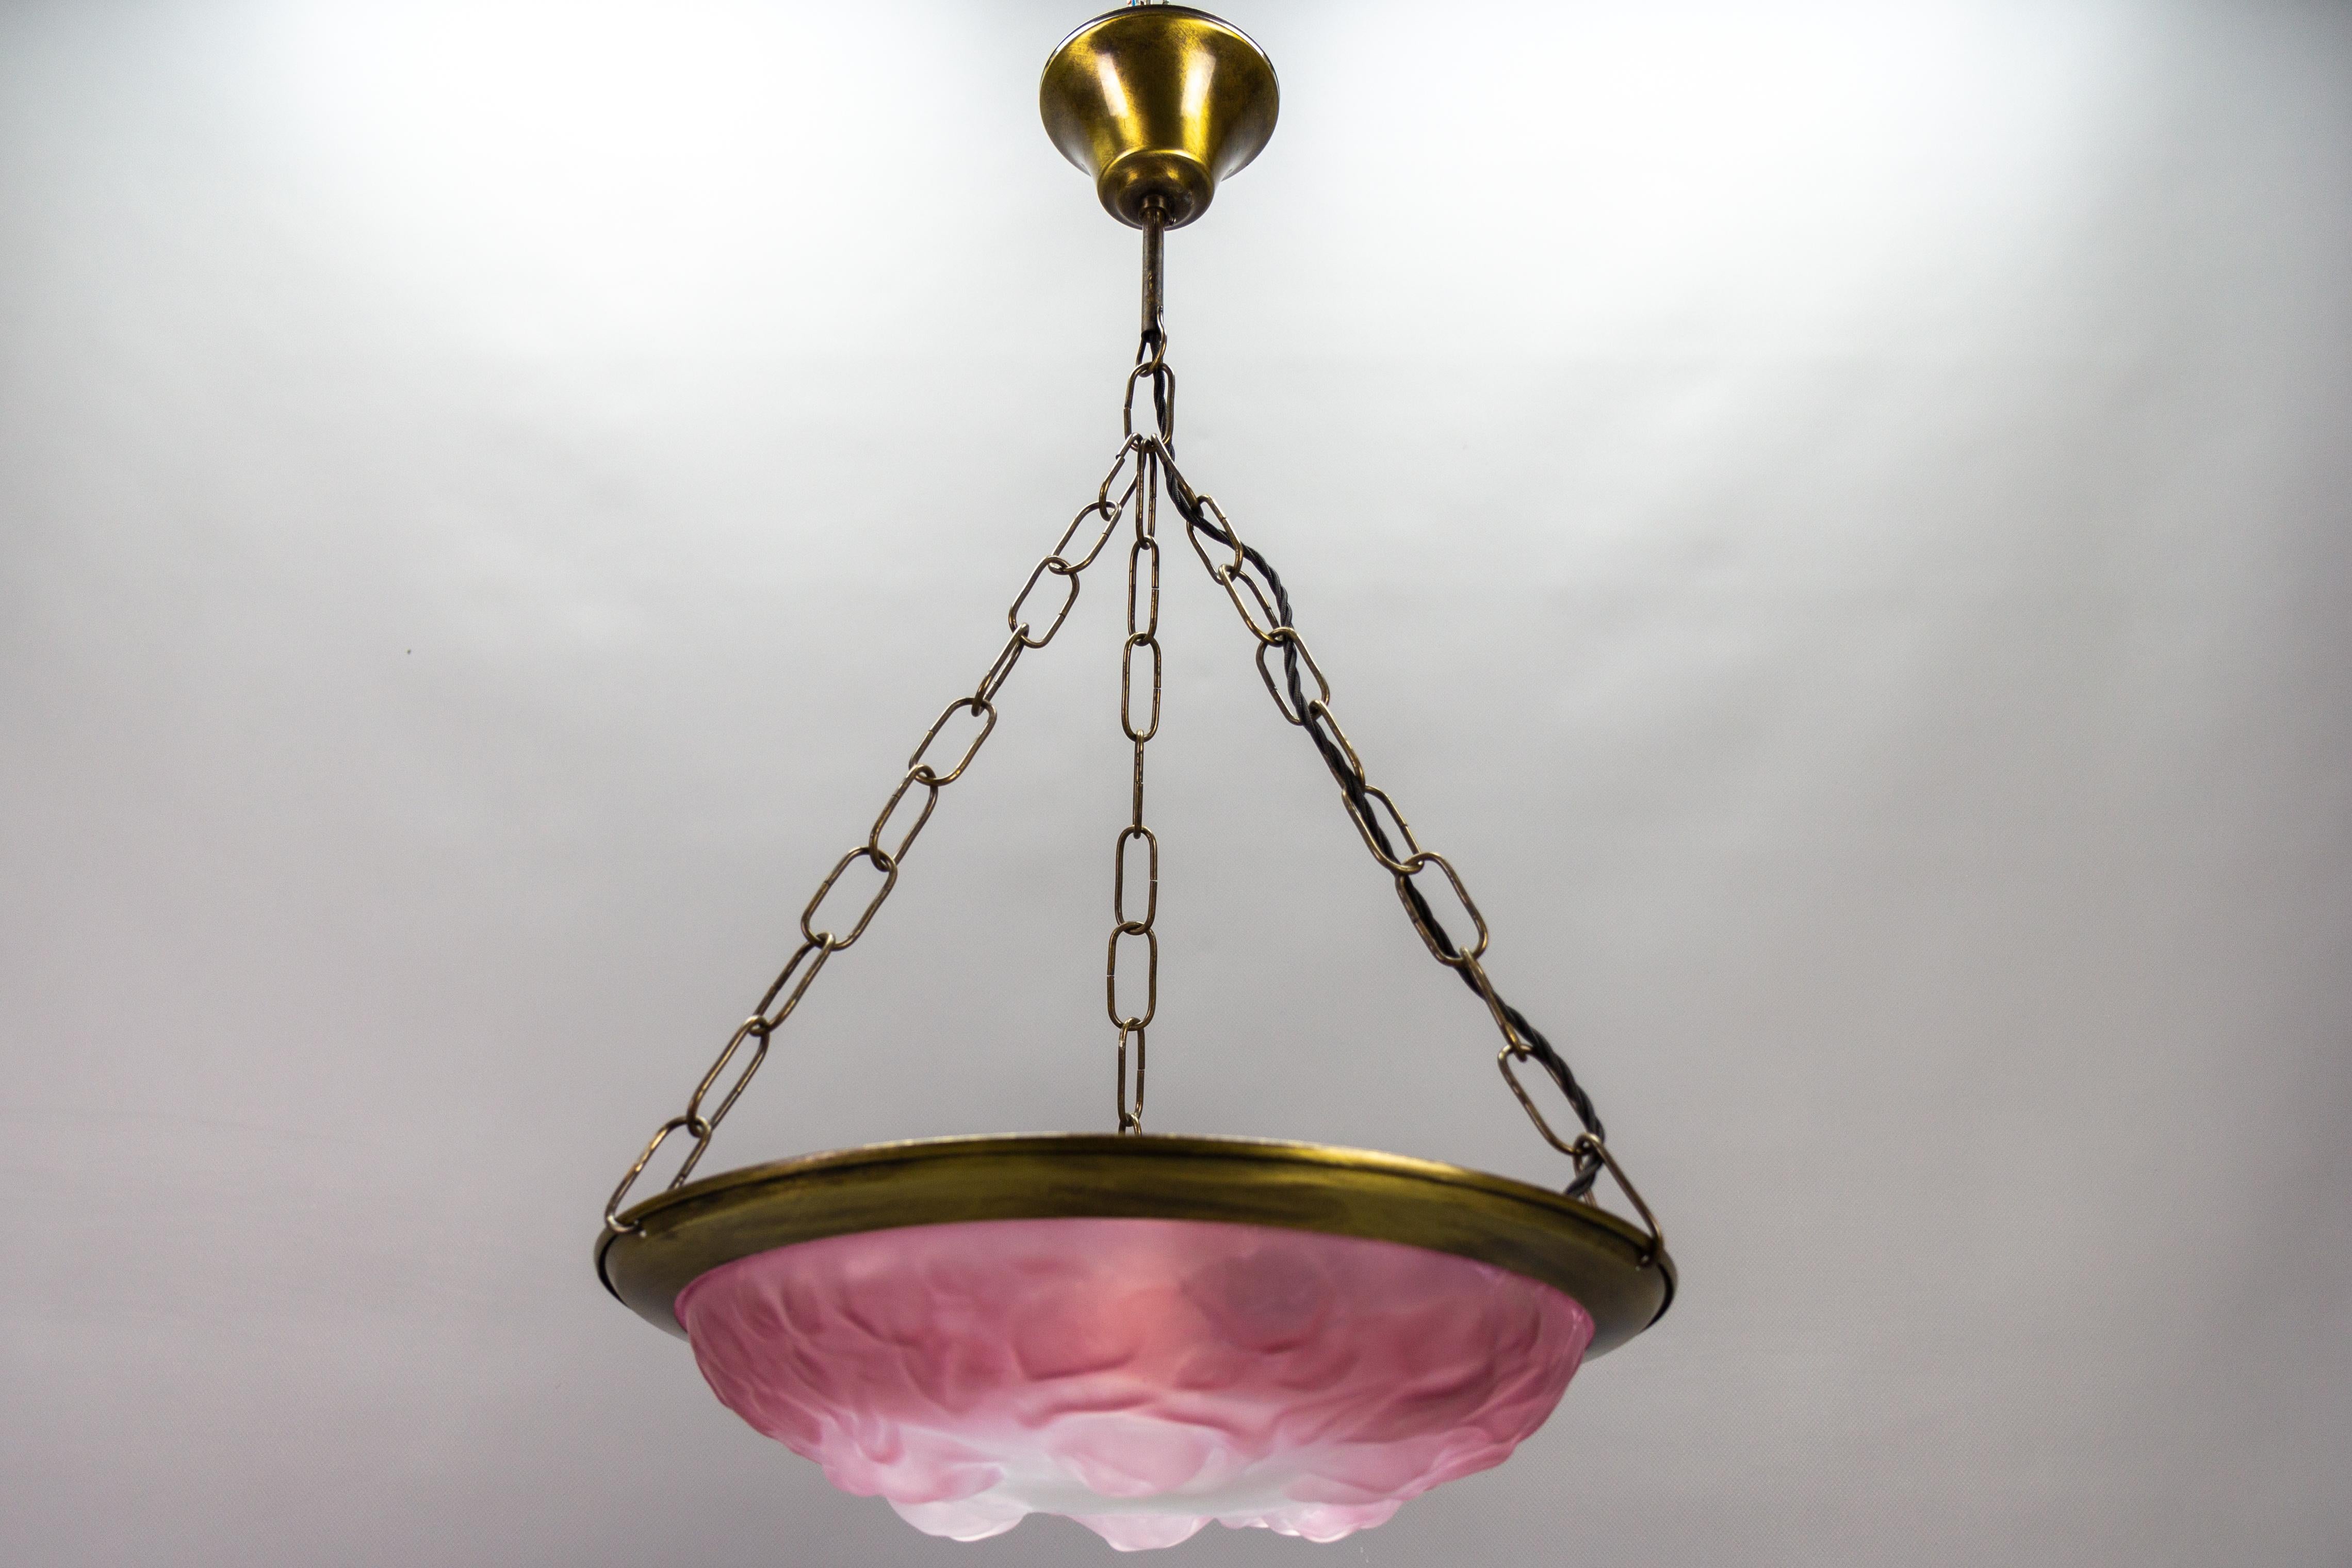 French vintage Art Deco style pink and white glass pendant light with roses, circa the 1980s.
This beautiful vintage pendant lamp features a frosted molded glass lampshade in pink and white colors with floral patterns of roses held by metal and